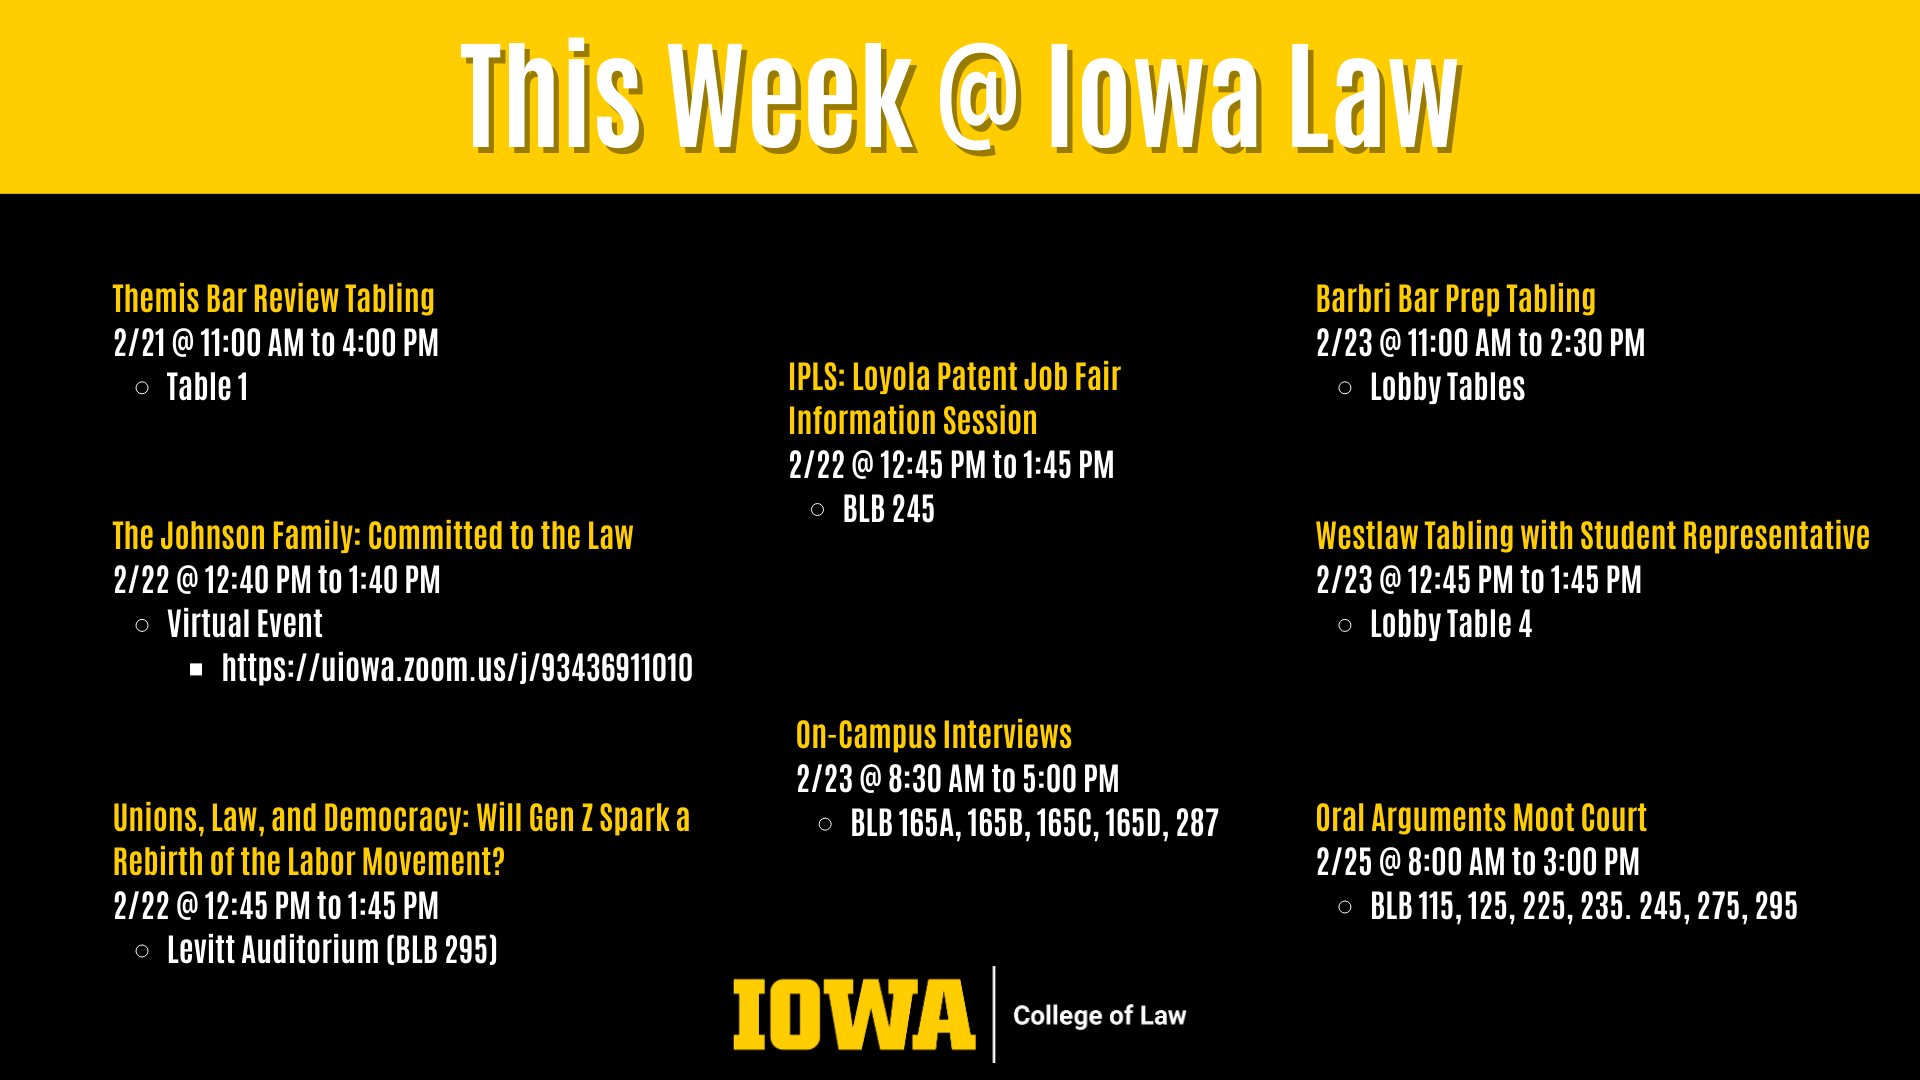 This Week @ Iowa Law The Johnson Family: Committed to the Law  2/22 @ 12:40 PM to 1:40 PM  Virtual Event  https://uiowa.zoom.us/j/93436911010 Unions, Law, and Democracy: Will Gen Z Spark a Rebirth of the Labor Movement?  2/22 @ 12:45 PM to 1:45 PM  Levitt Auditorium (BLB 295) Oral Arguments Moot Court 2/25 @ 8:00 AM to 3:00 PM  BLB 115, 125, 225, 235. 245, 275, 295 Westlaw Tabling with Student Representative 2/23 @ 12:45 PM to 1:45 PM  Lobby Table 4 On-Campus Interviews  2/23 @ 8:30 AM to 5:00 PM  BLB 165A, 165B, 165C, 165D, 287 IPLS: Loyola Patent Job Fair Information Session 2/22 @ 12:45 PM to 1:45 PM  BLB 245 Barbri Bar Prep Tabling 2/23 @ 11:00 AM to 2:30 PM  Lobby Tables Themis Bar Review Tabling 2/21 @ 11:00 AM to 4:00 PM  Table 1